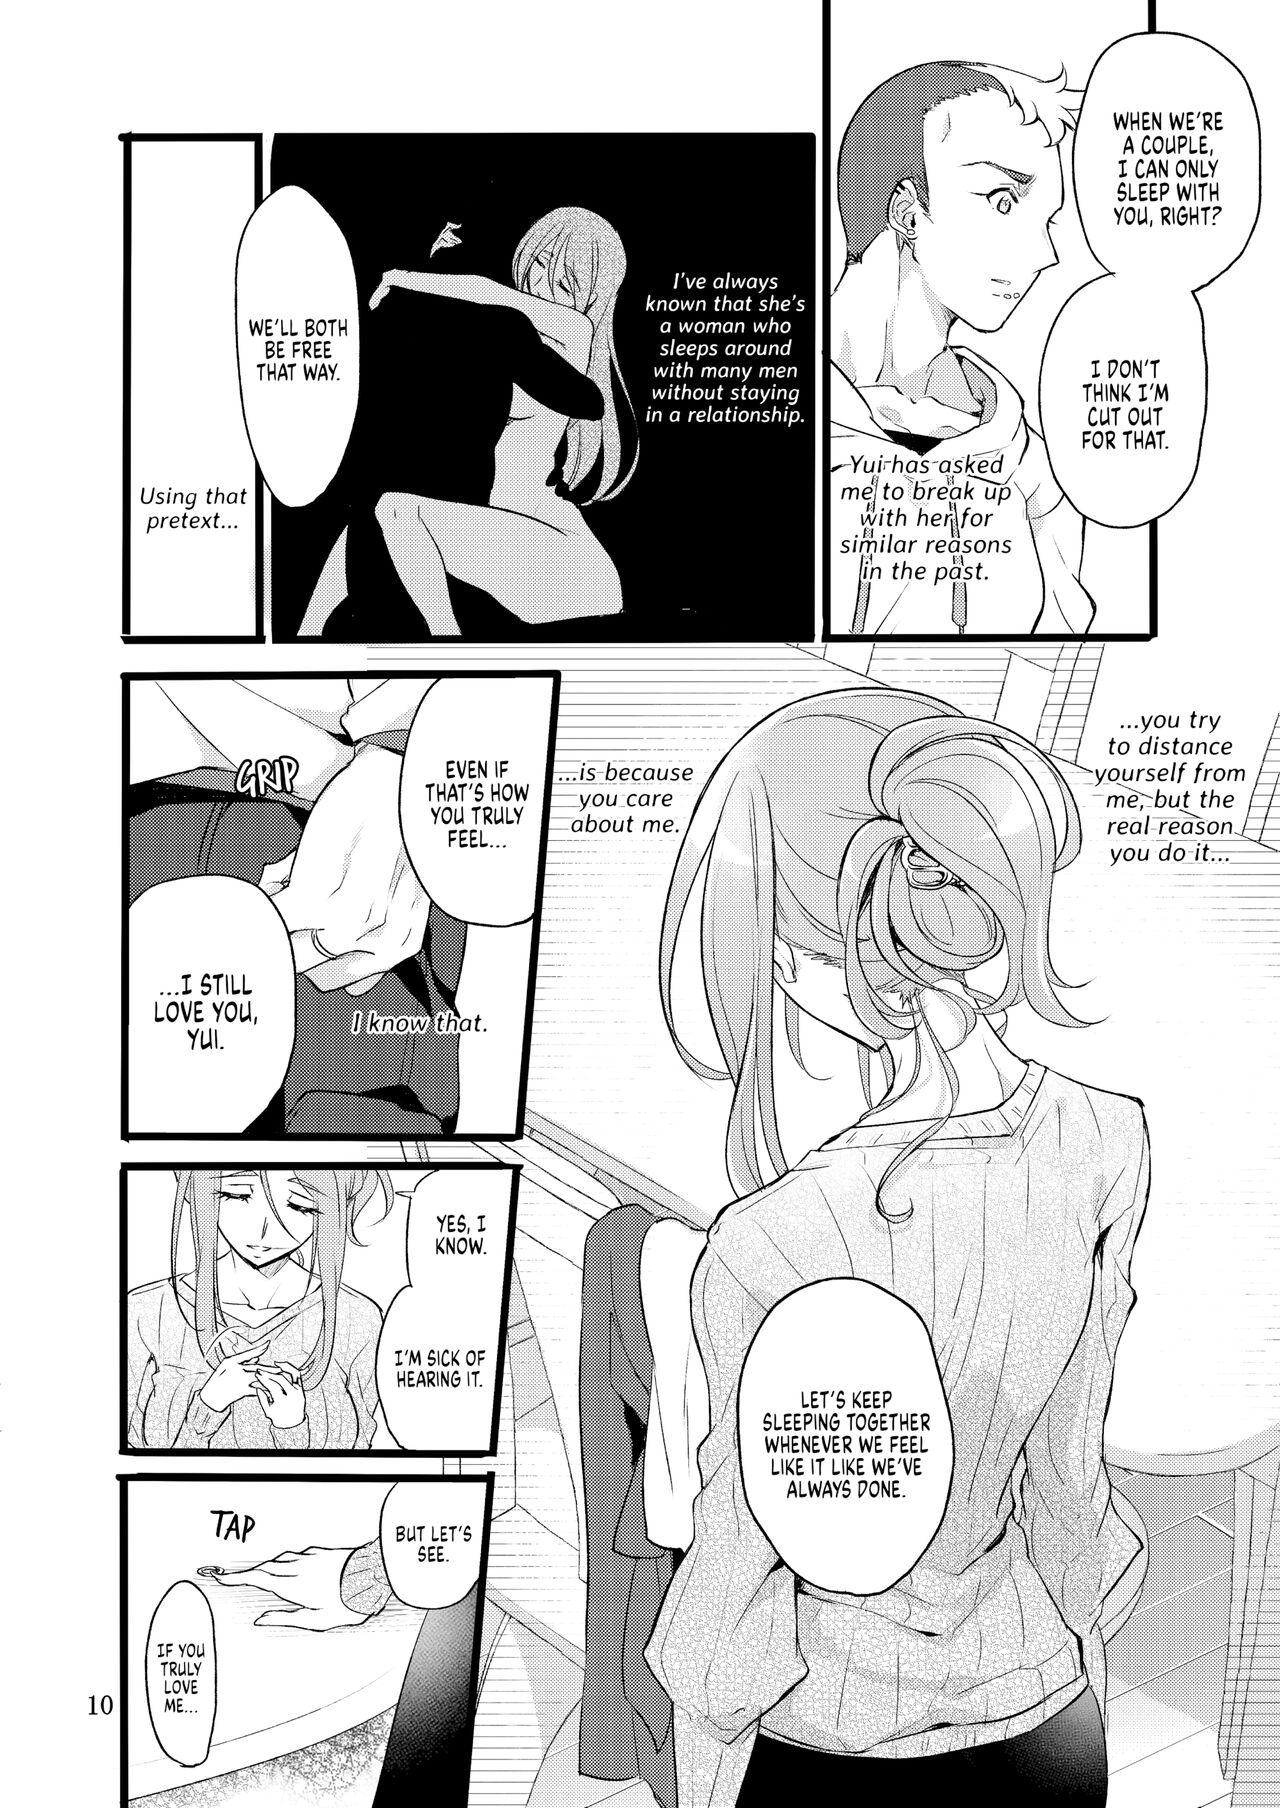 Hermana Youre not the One at Fault - Original Sperm - Page 9